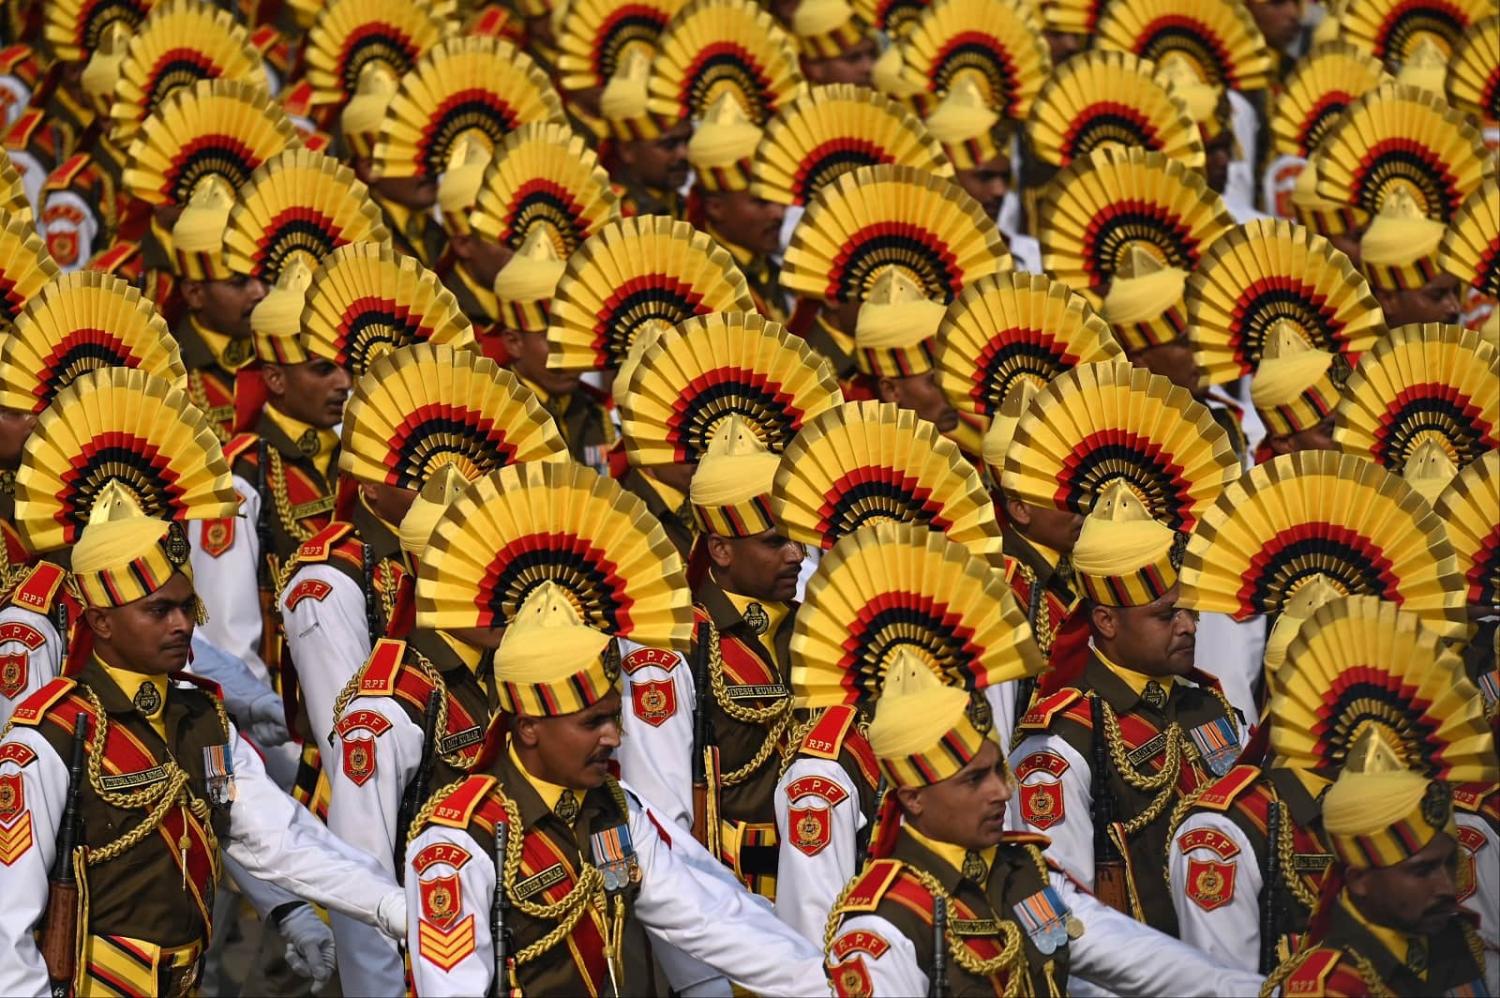 Indian soldiers during dress rehearsal for the Republic Day parade in New Delhi, 23 January 2023 (Money Sharma/AFP via Getty Images)